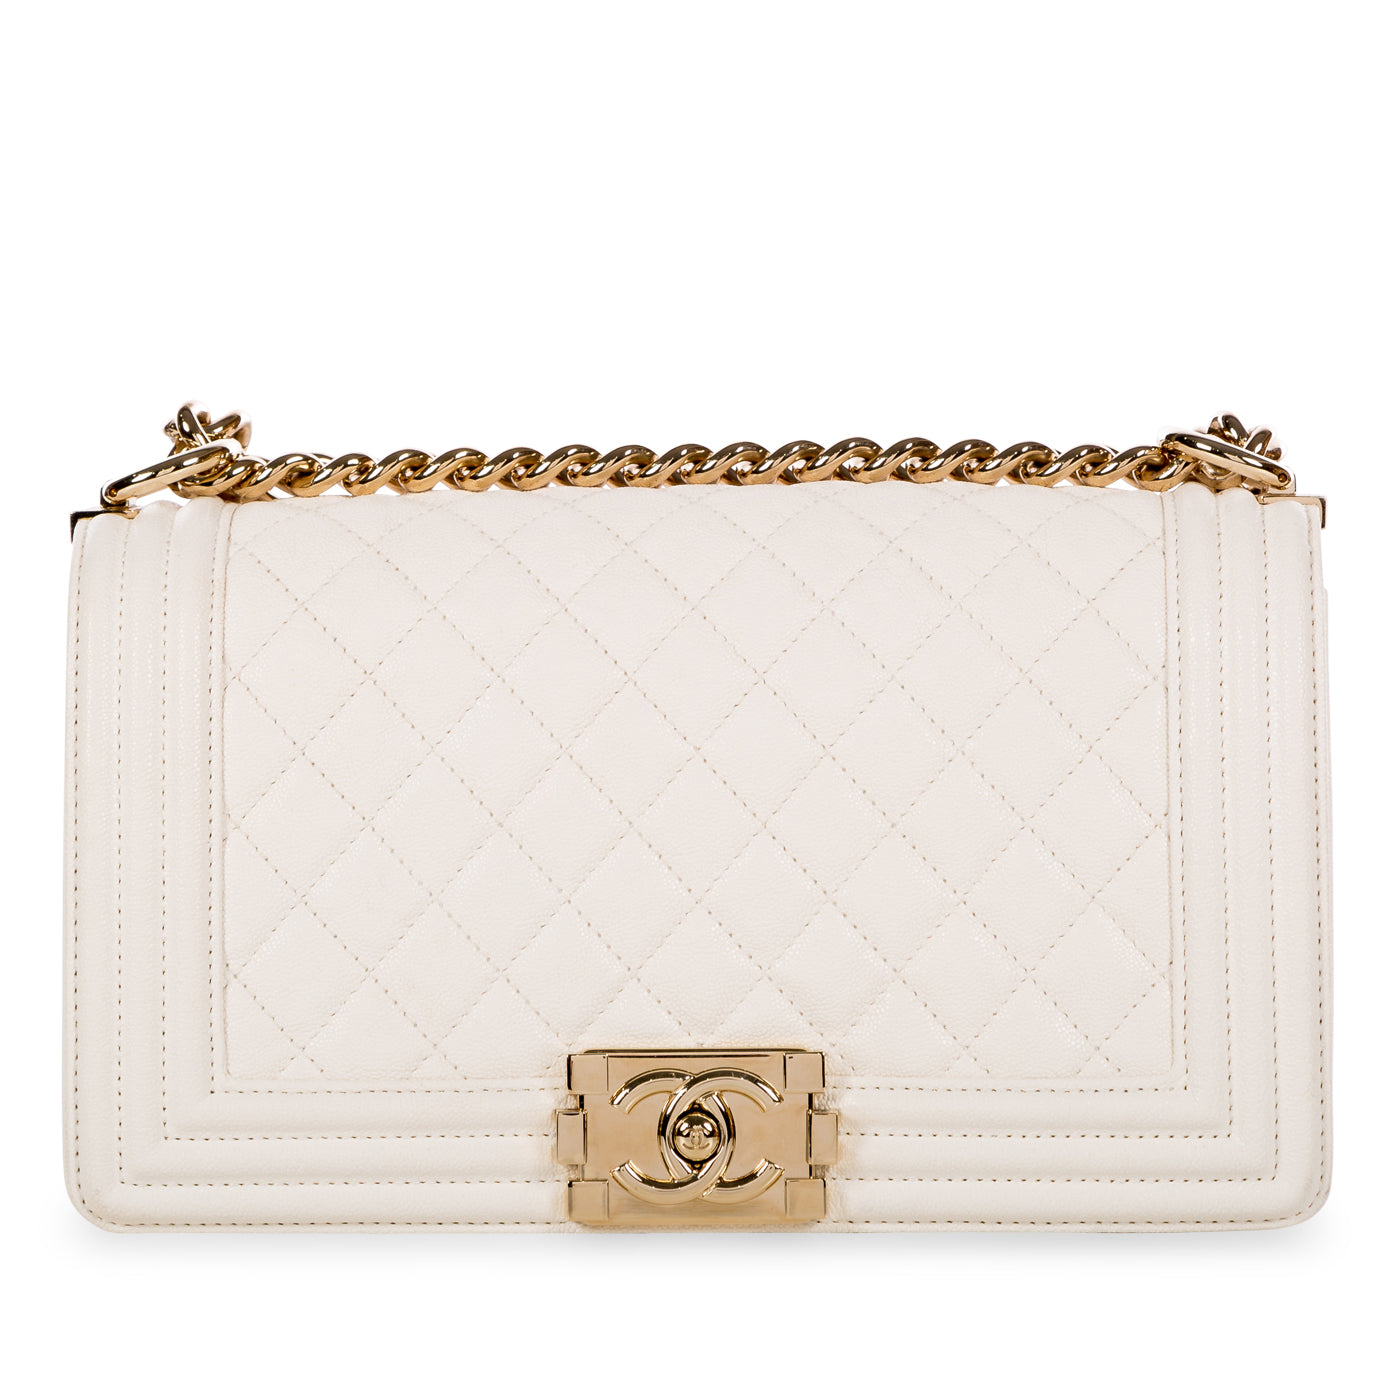 Chanel Boy Bags  Chanel Boy Handbags for Sale  Madison Avenue Couture